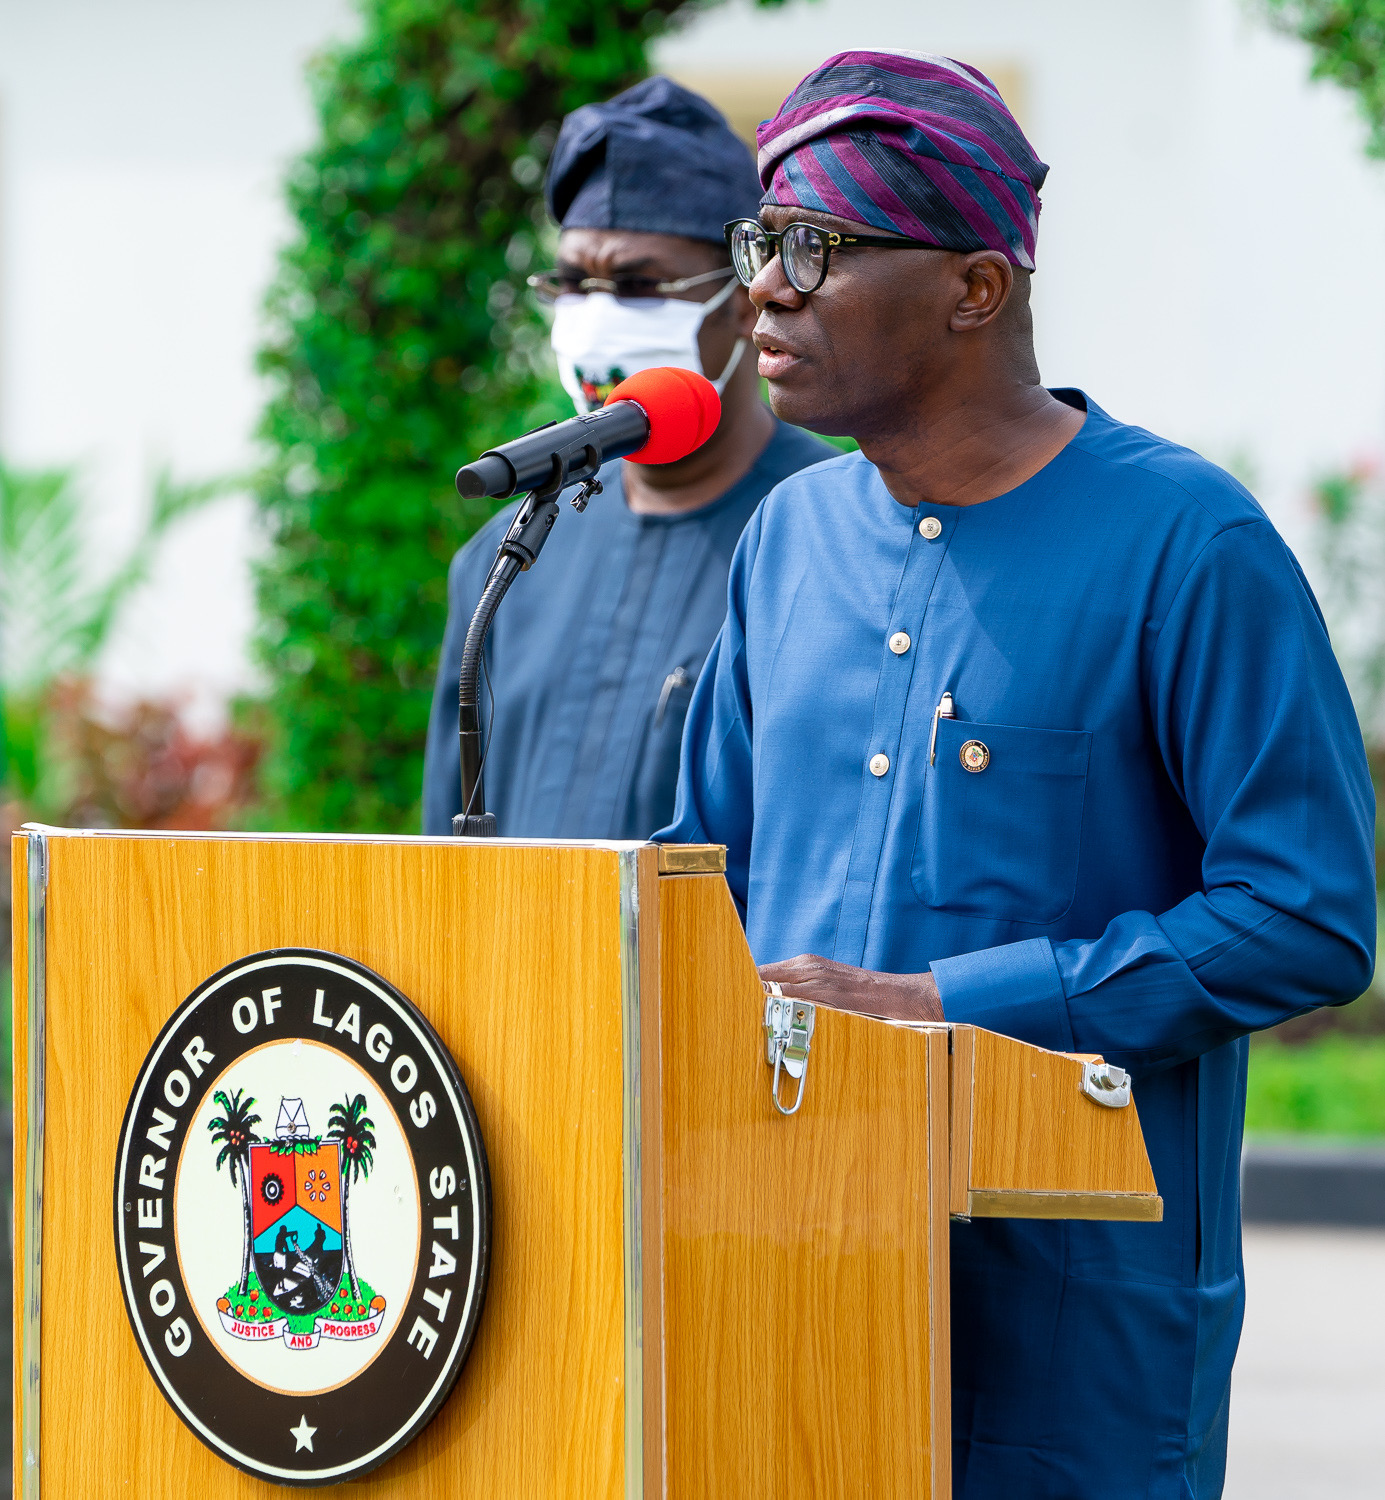 Lagos State Governor, Mr. Babajide Sanwo-Olu, addressing journalists on the State’s guidelines and protocols for the second phase of the gradual easing of C0VID-19 lockdown, at Lagos House, Marina, on Thursday, June 4, 2020. With him is the Deputy Governor, Dr. Obafemi Hamzat.